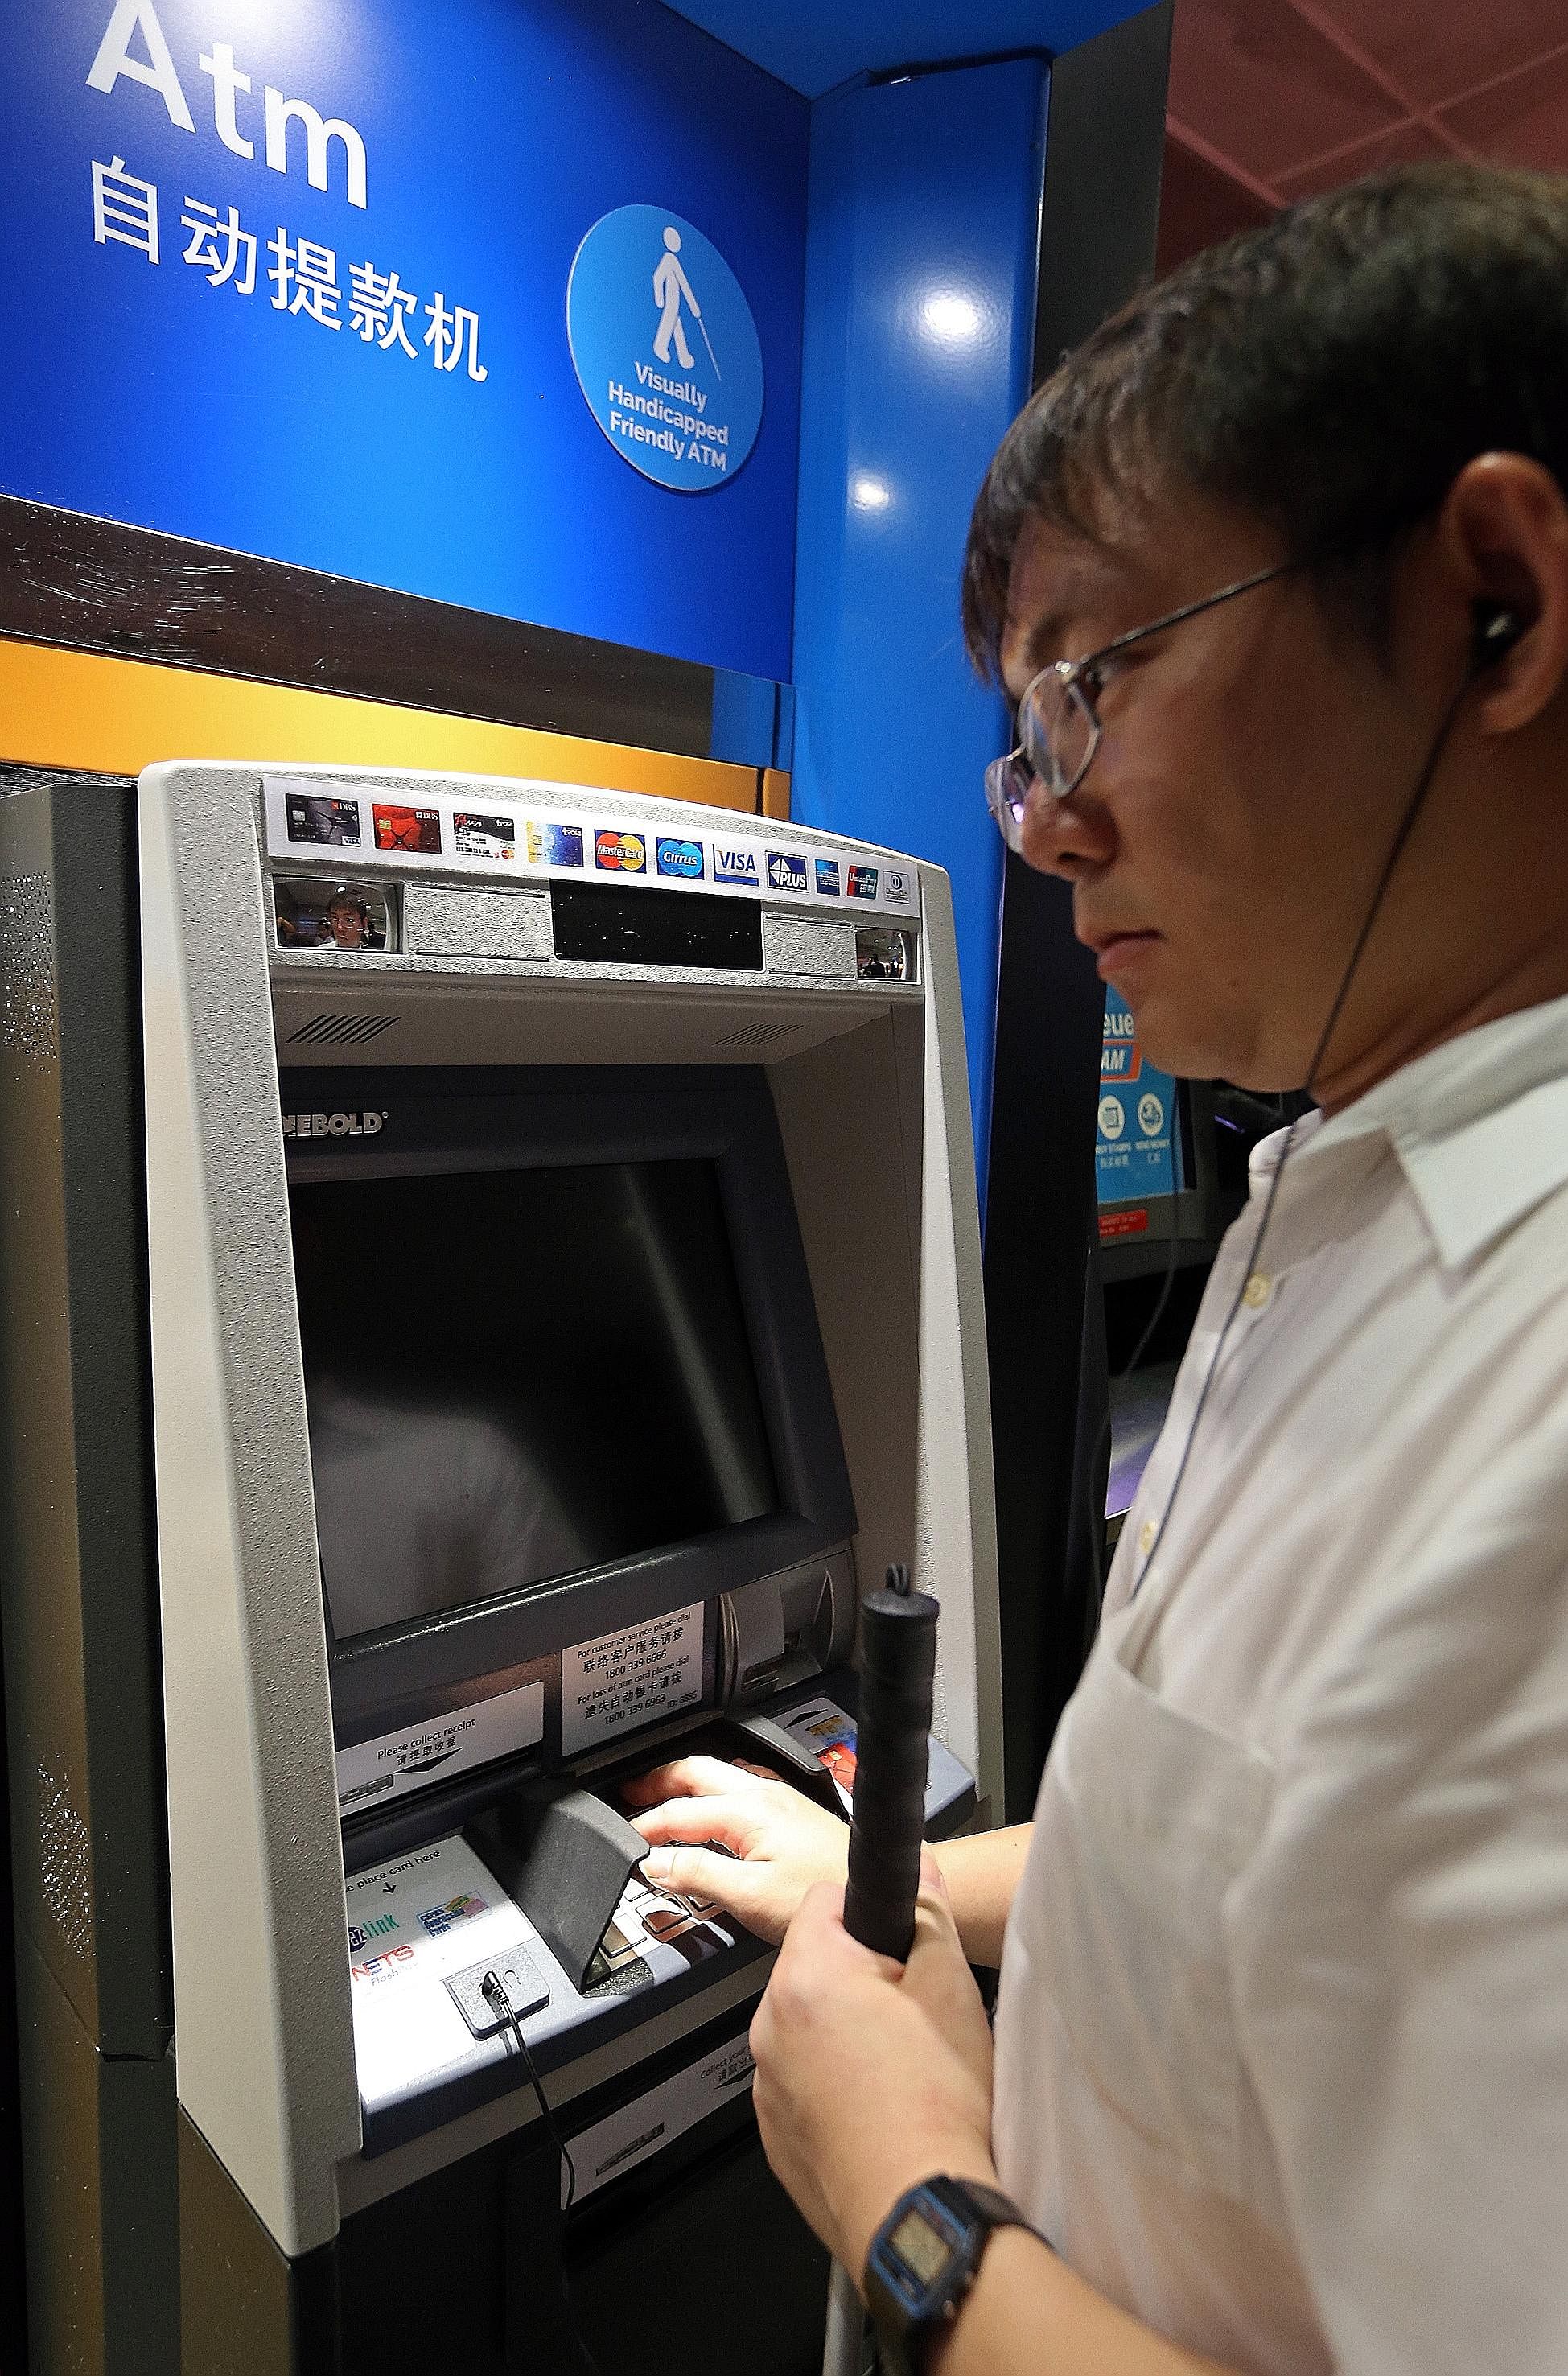 The ATMs are enhanced with user-friendly functions for those who have visual disabilities, such as Braille instructions (left, top) and audio guidance. The user simply has to plug his or her earphones into the ATM's audiojack (left, bottom) to activa